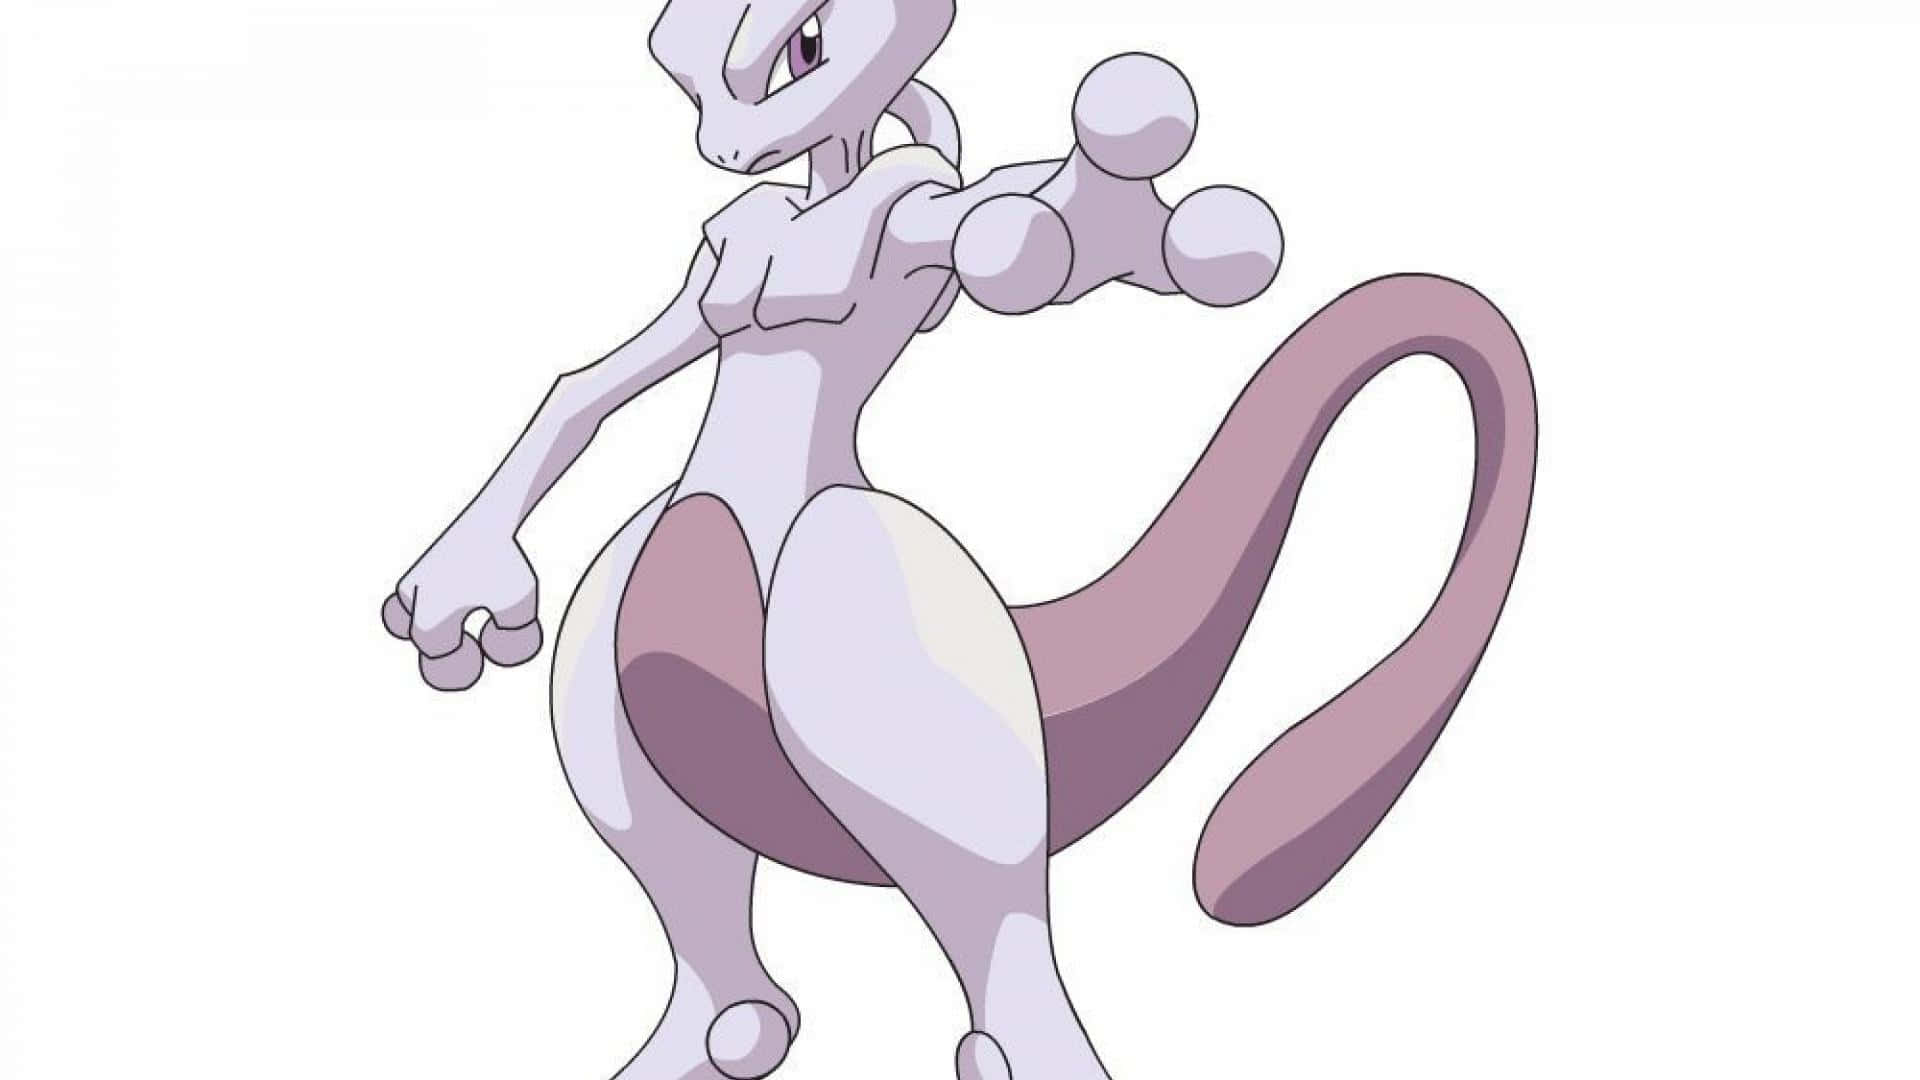 A White Pokemon Character With A Pink Tail